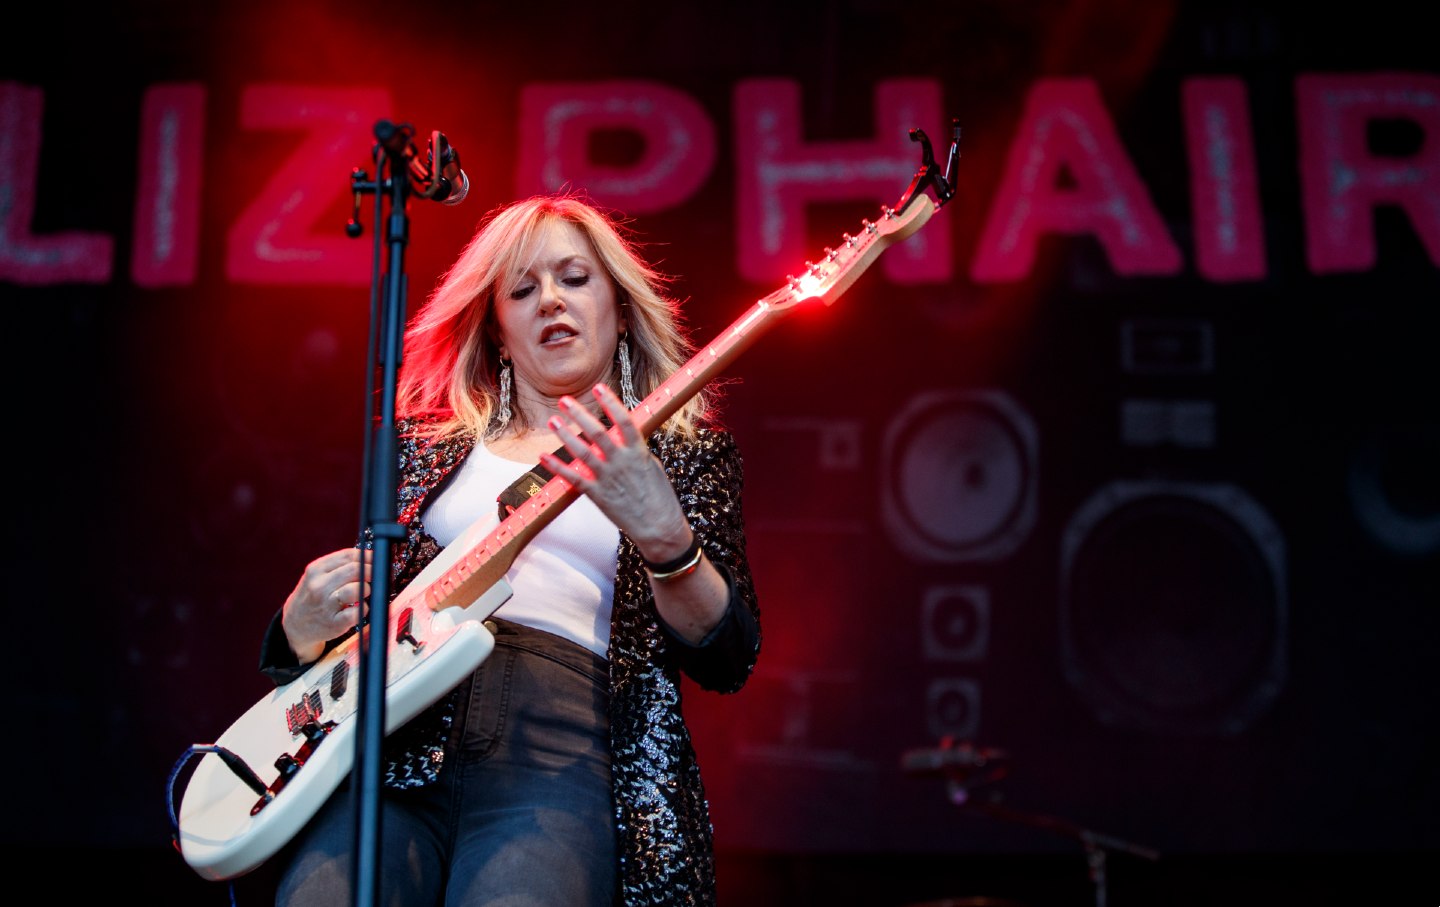 Liz Phair performs in concert during Primavera Sound on May 31, 2019, in Barcelona, Spain.